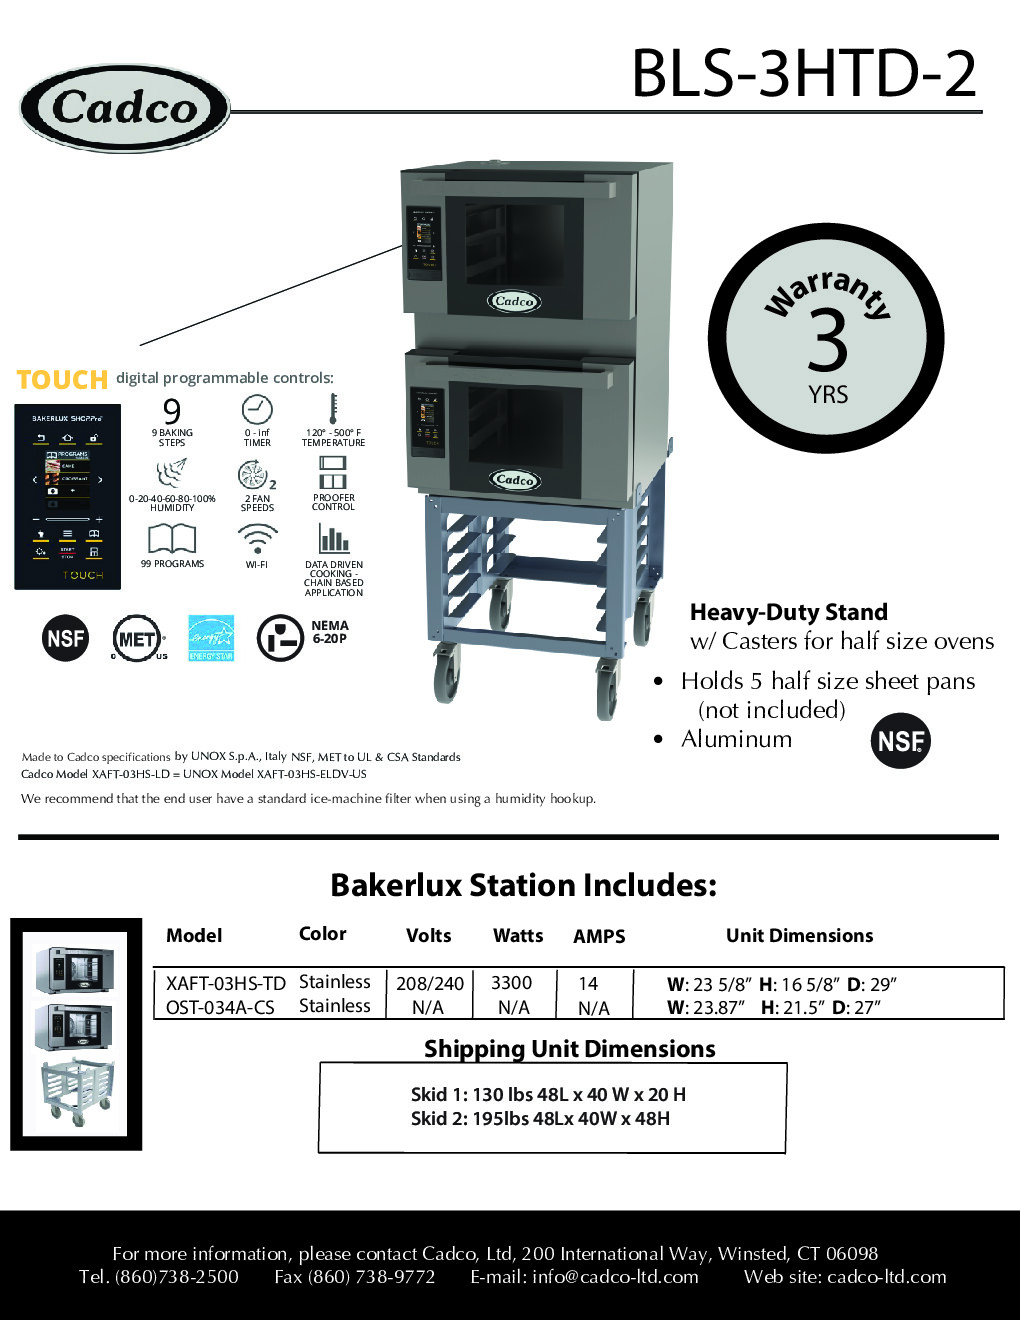 Cadco BLS-3HTD-2H Electric Convection Oven